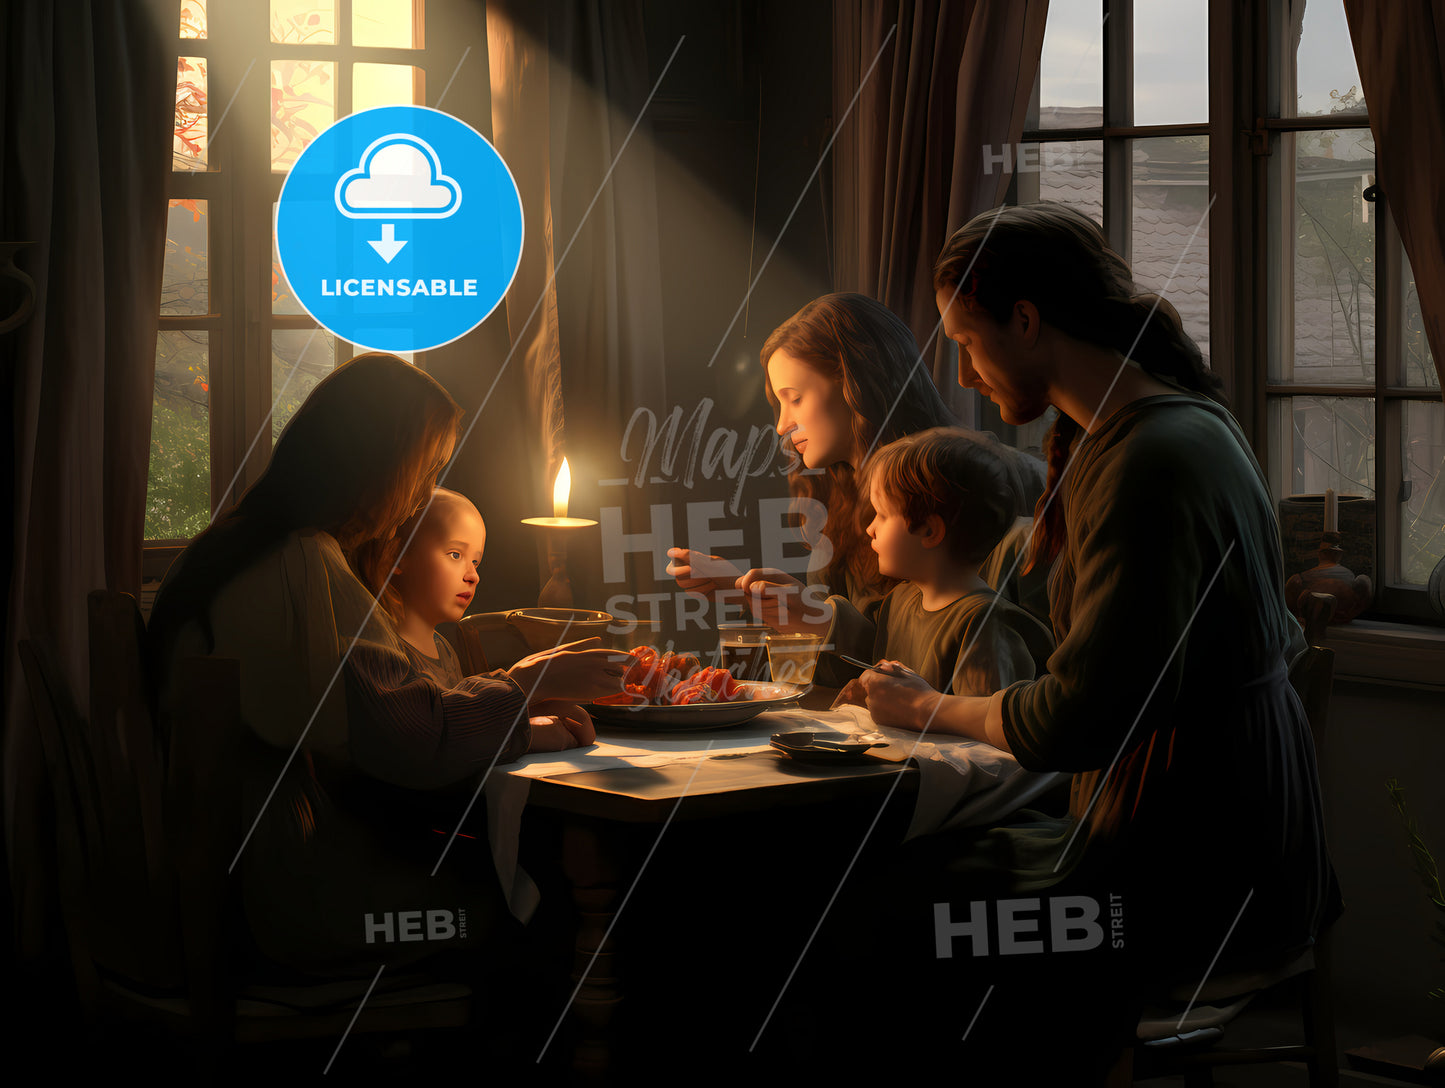 A Seemingly Harmonious, A Family Sitting At A Table With A Candle